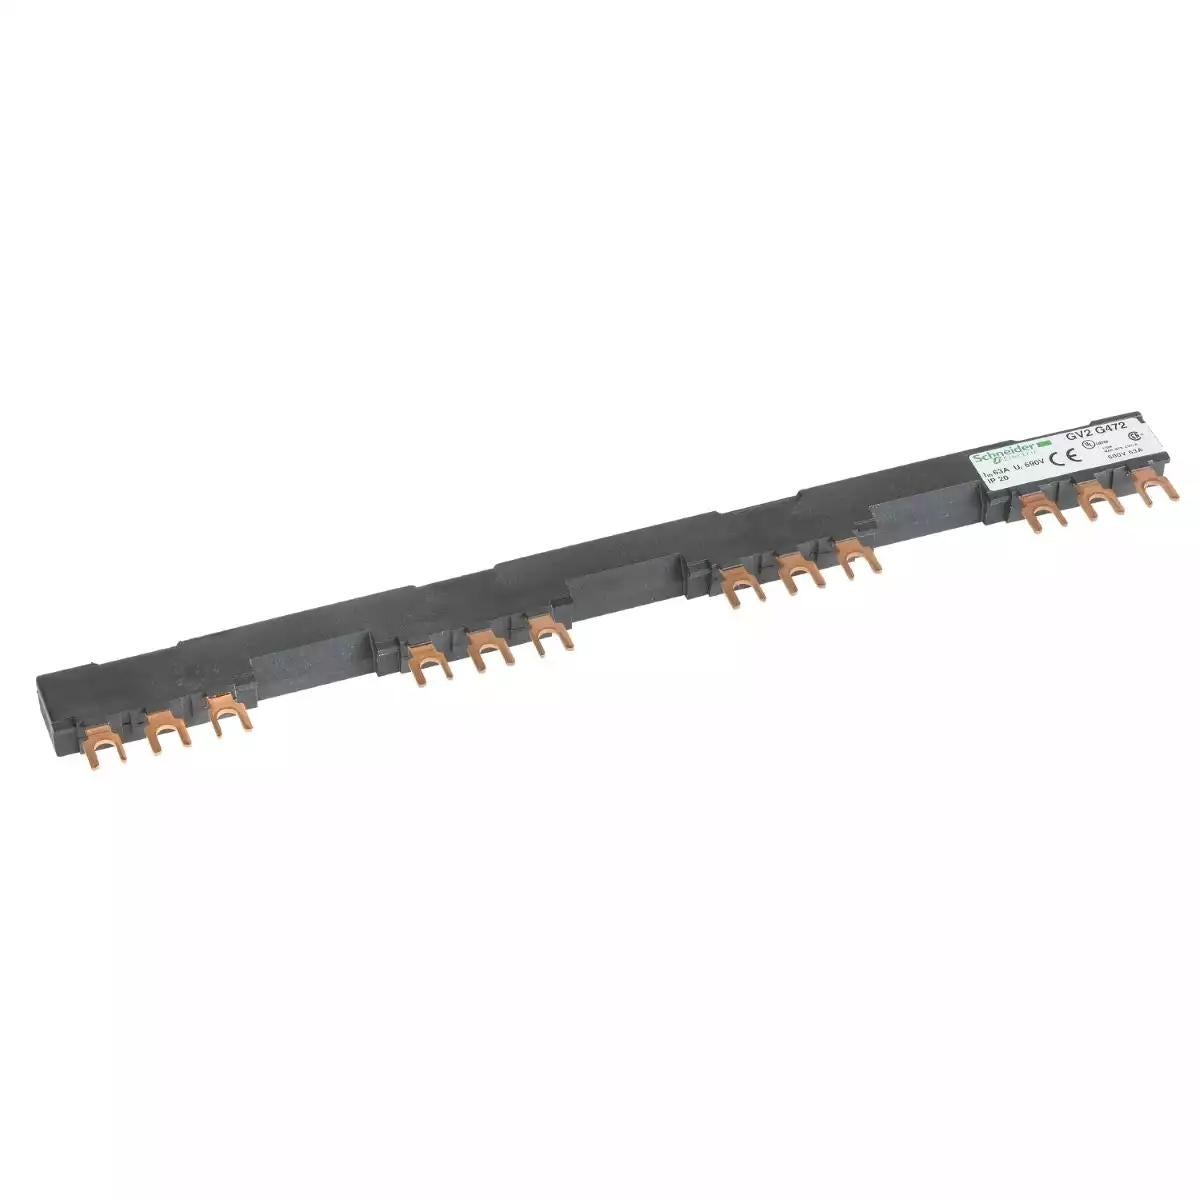 Linergy FT - Comb busbar - 63 A - 4 tap-offs - 72 mm pitch